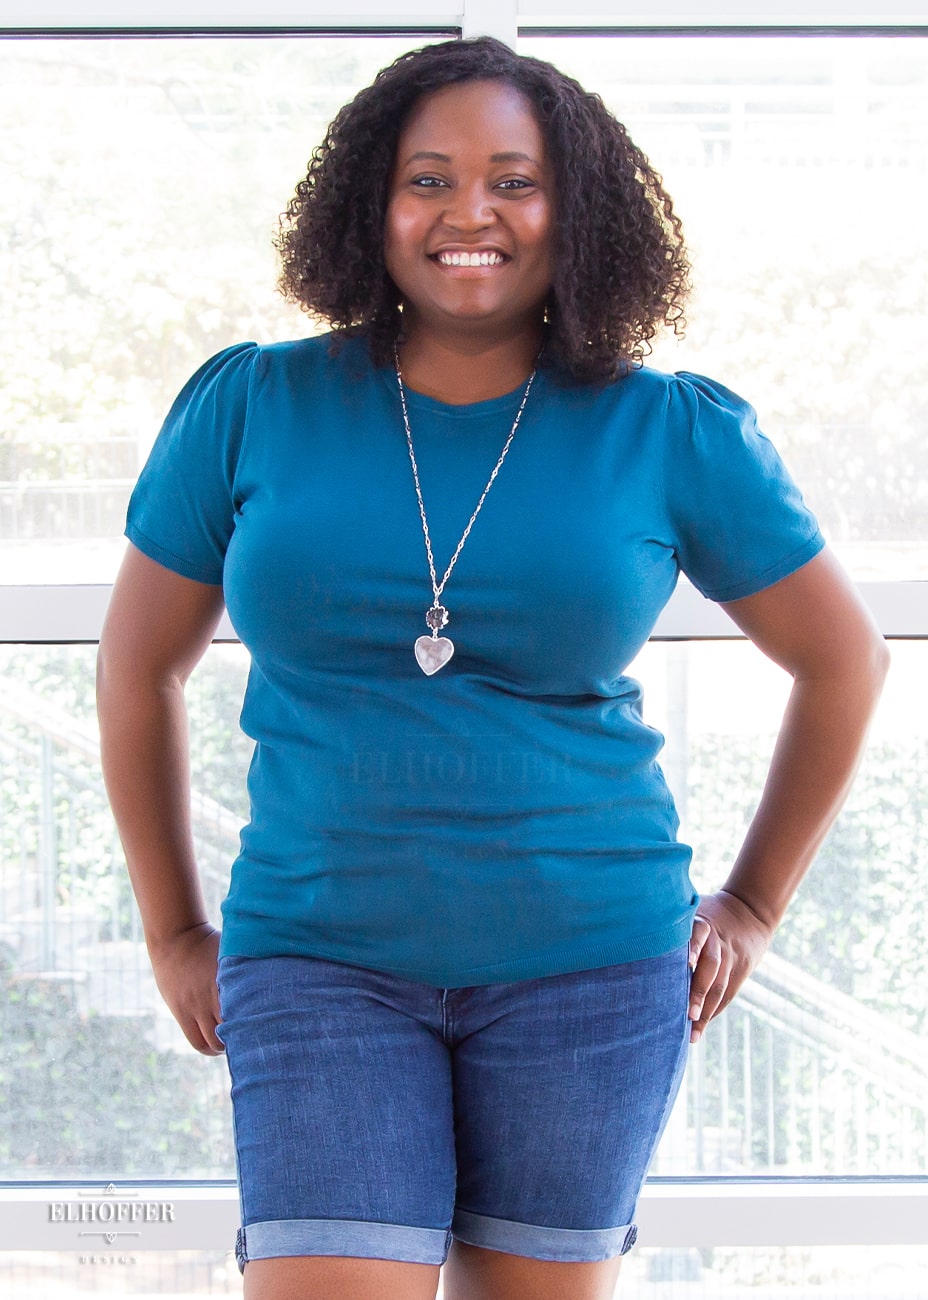 Maydelle, a medium dark skinned XL model with dark shoulder length tight curly hair, is smiling while wearing a short sleeve light weight peacock teal knit top. The top hits about mid hip in length and the sleeves have pleated gathering at the shoulders.